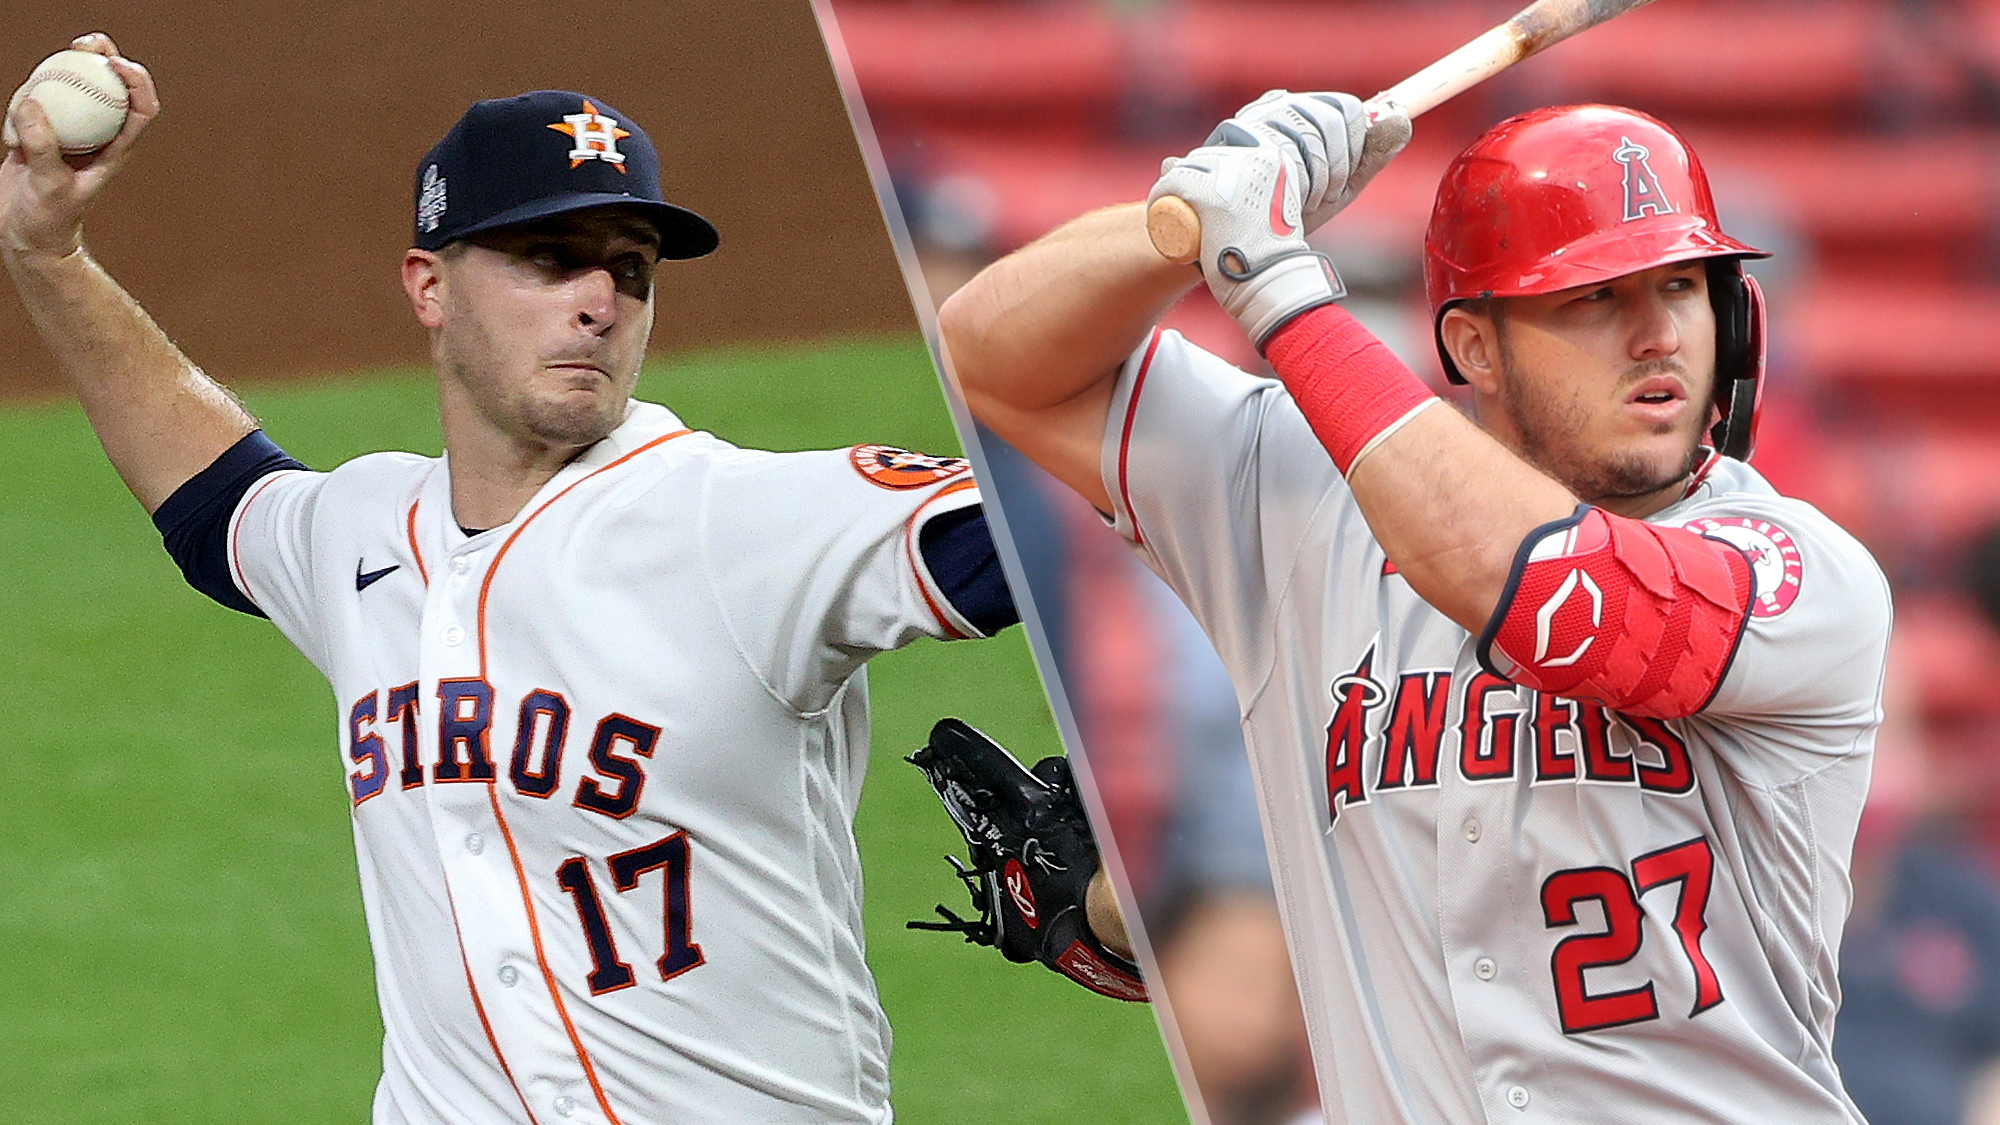 How to Watch the Astros vs. Angels Game: Streaming & TV Info